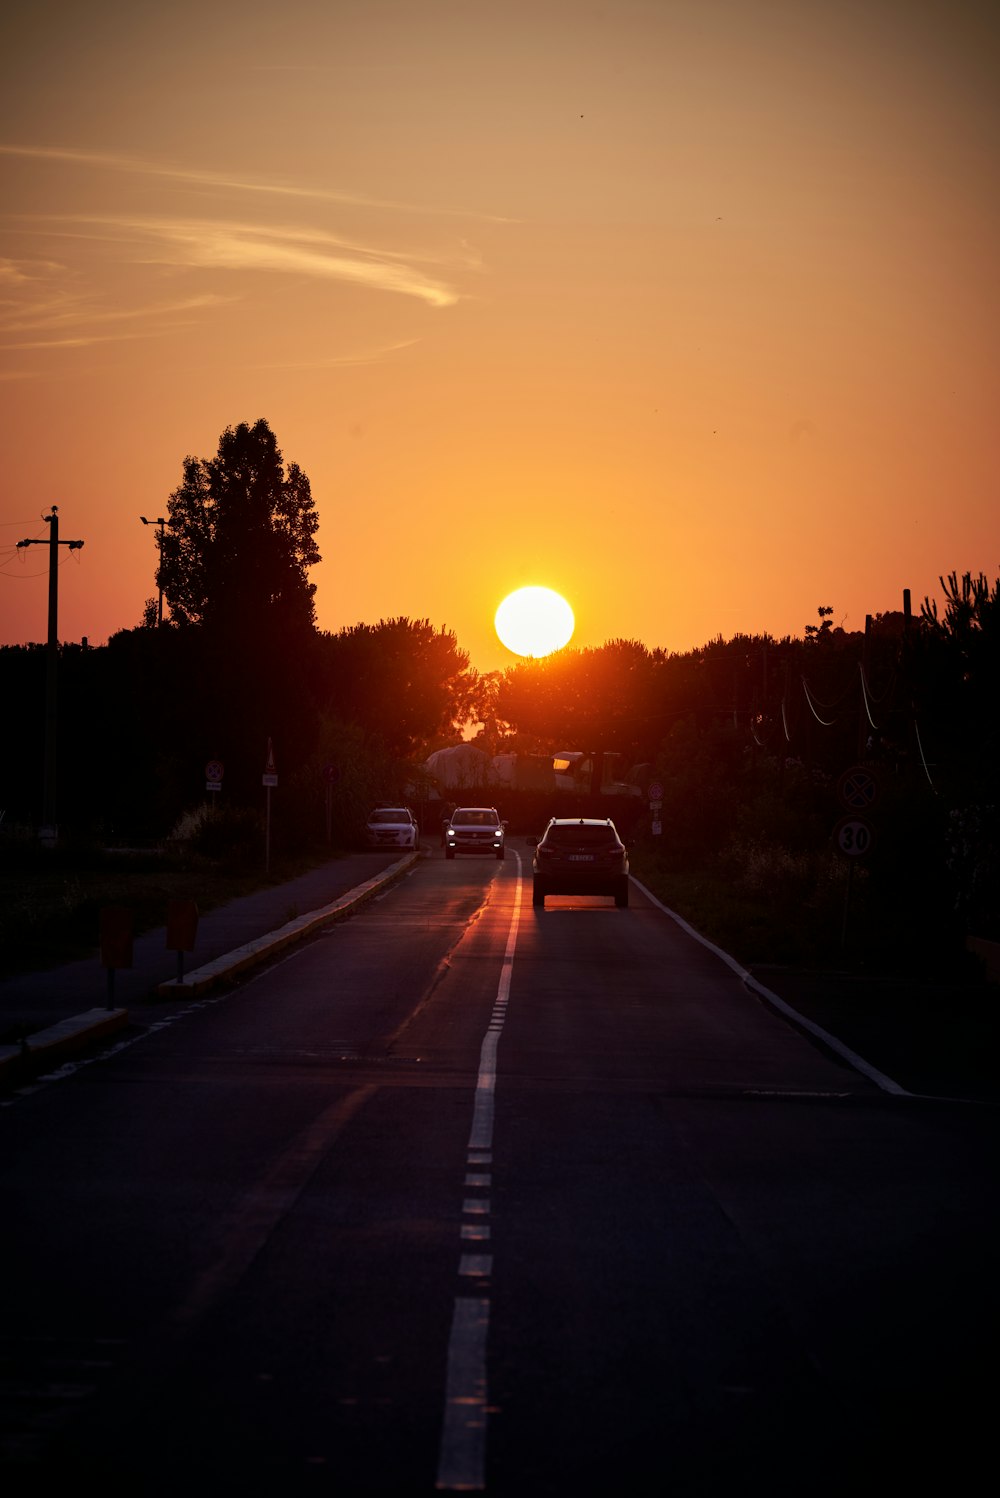 the sun is setting over the horizon of a street